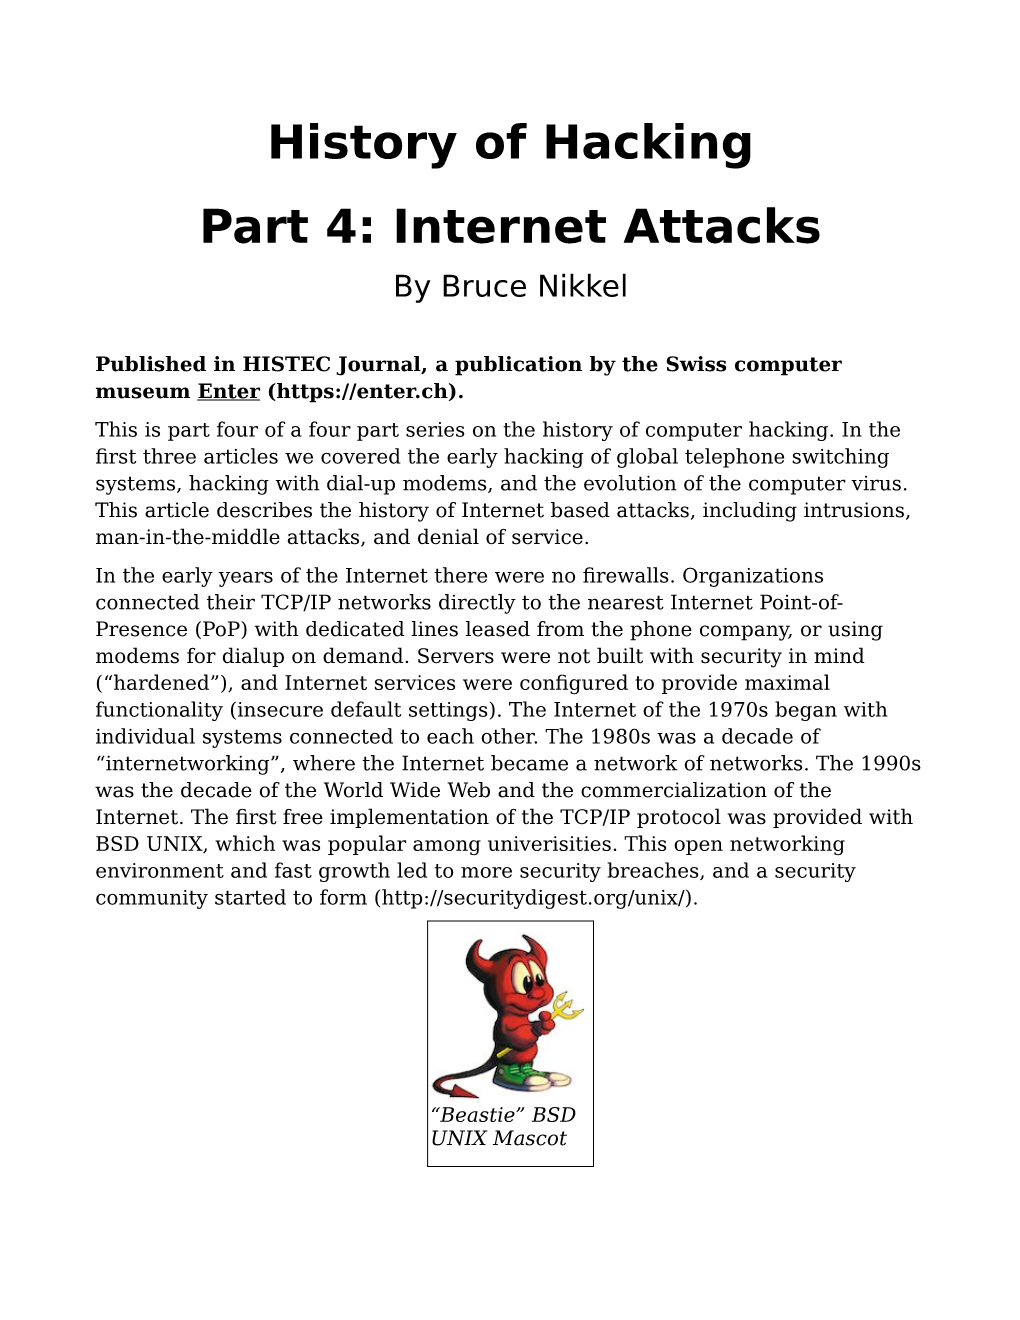 History of Hacking Part 4: Internet Attacks by Bruce Nikkel